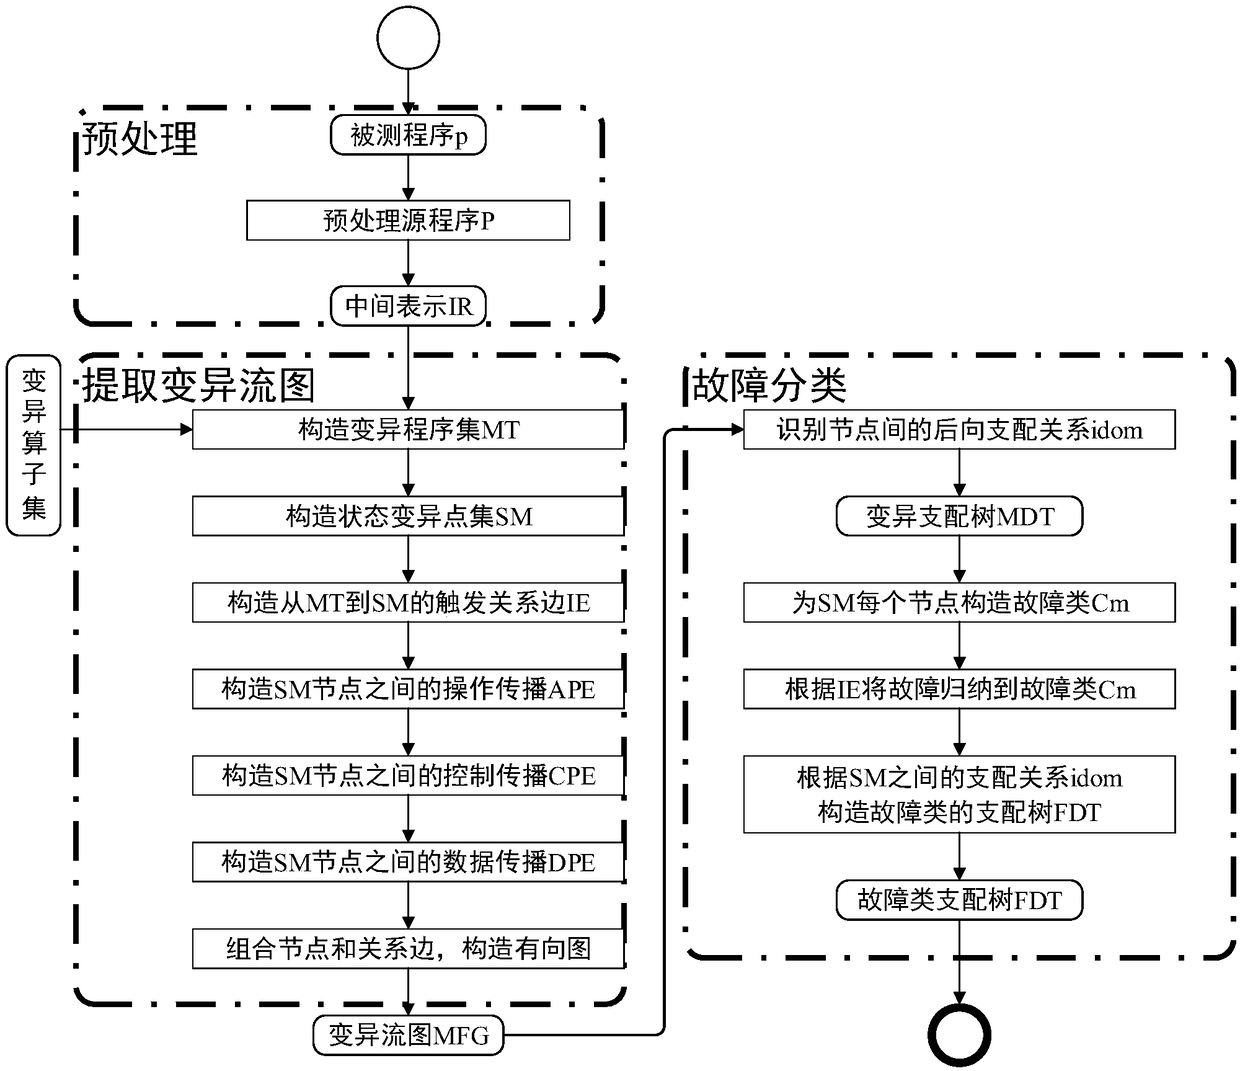 Program state-oriented fault classification method, mutation testing method and device